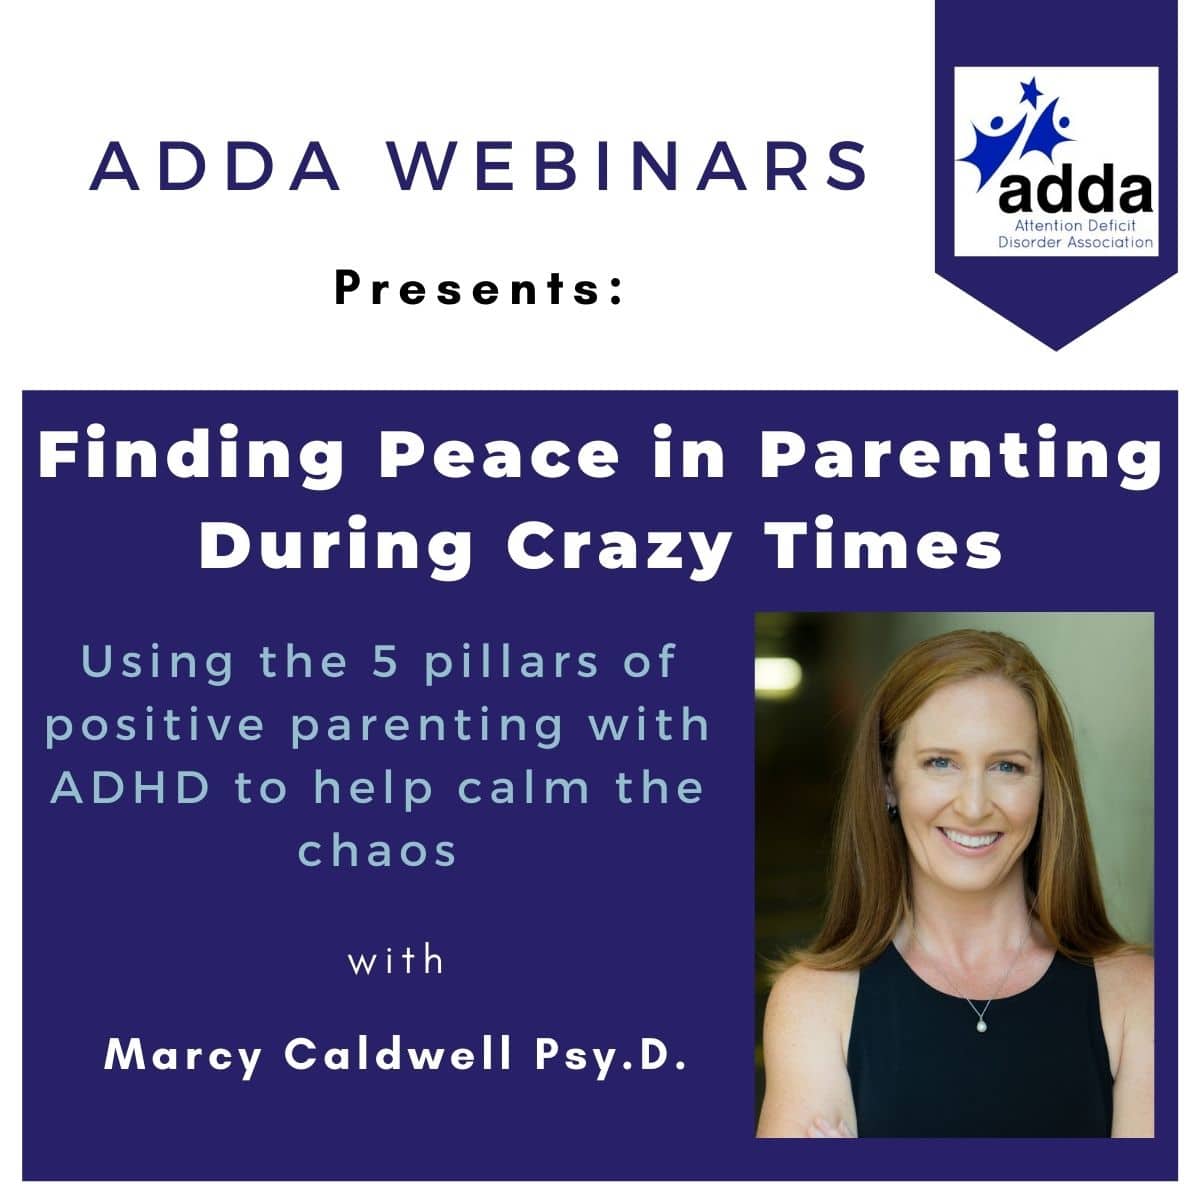 ADDA Webinars Finding peace in parenting during crazy times